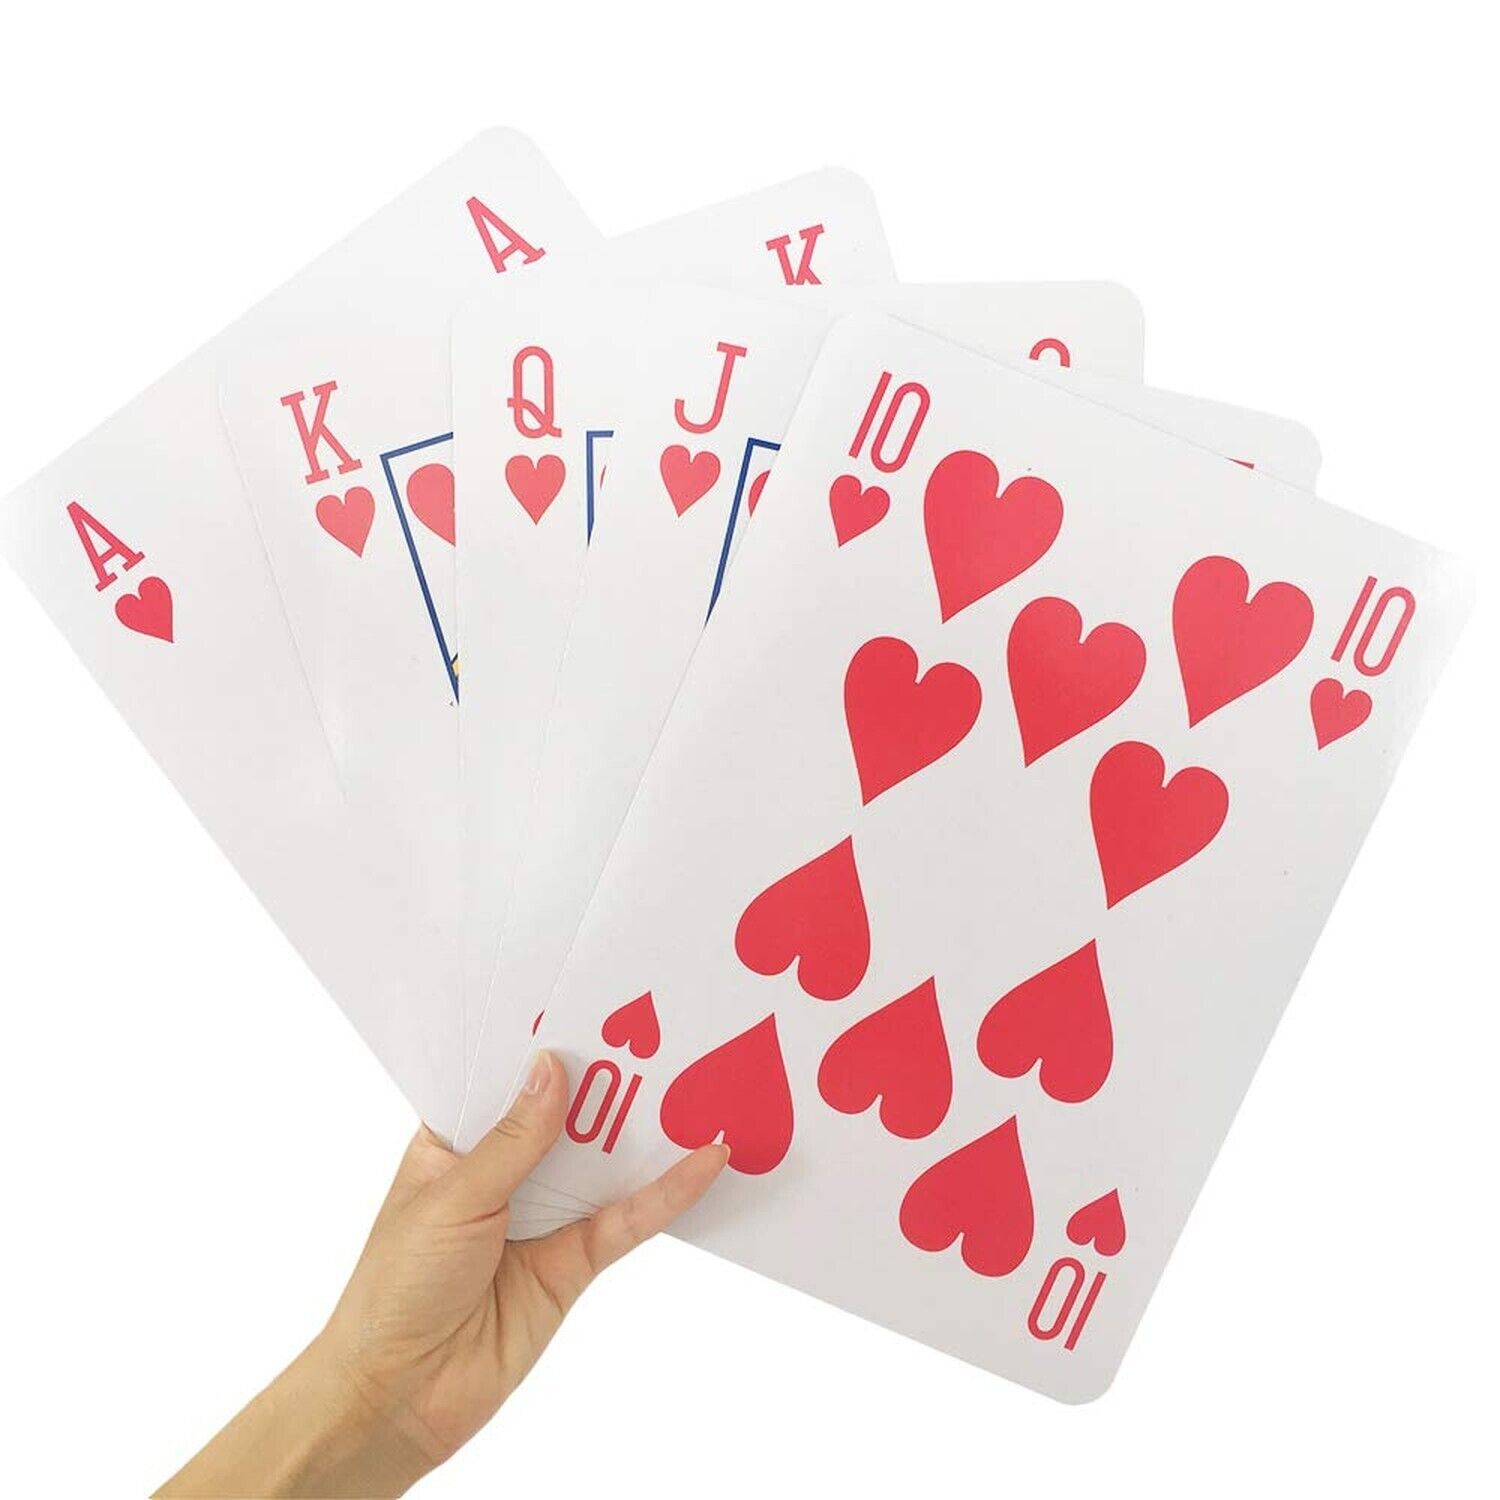 Yuanhe Jumbo Giant Playing Card Deck, 8X11 Inch Large Oversized Playing Cards...